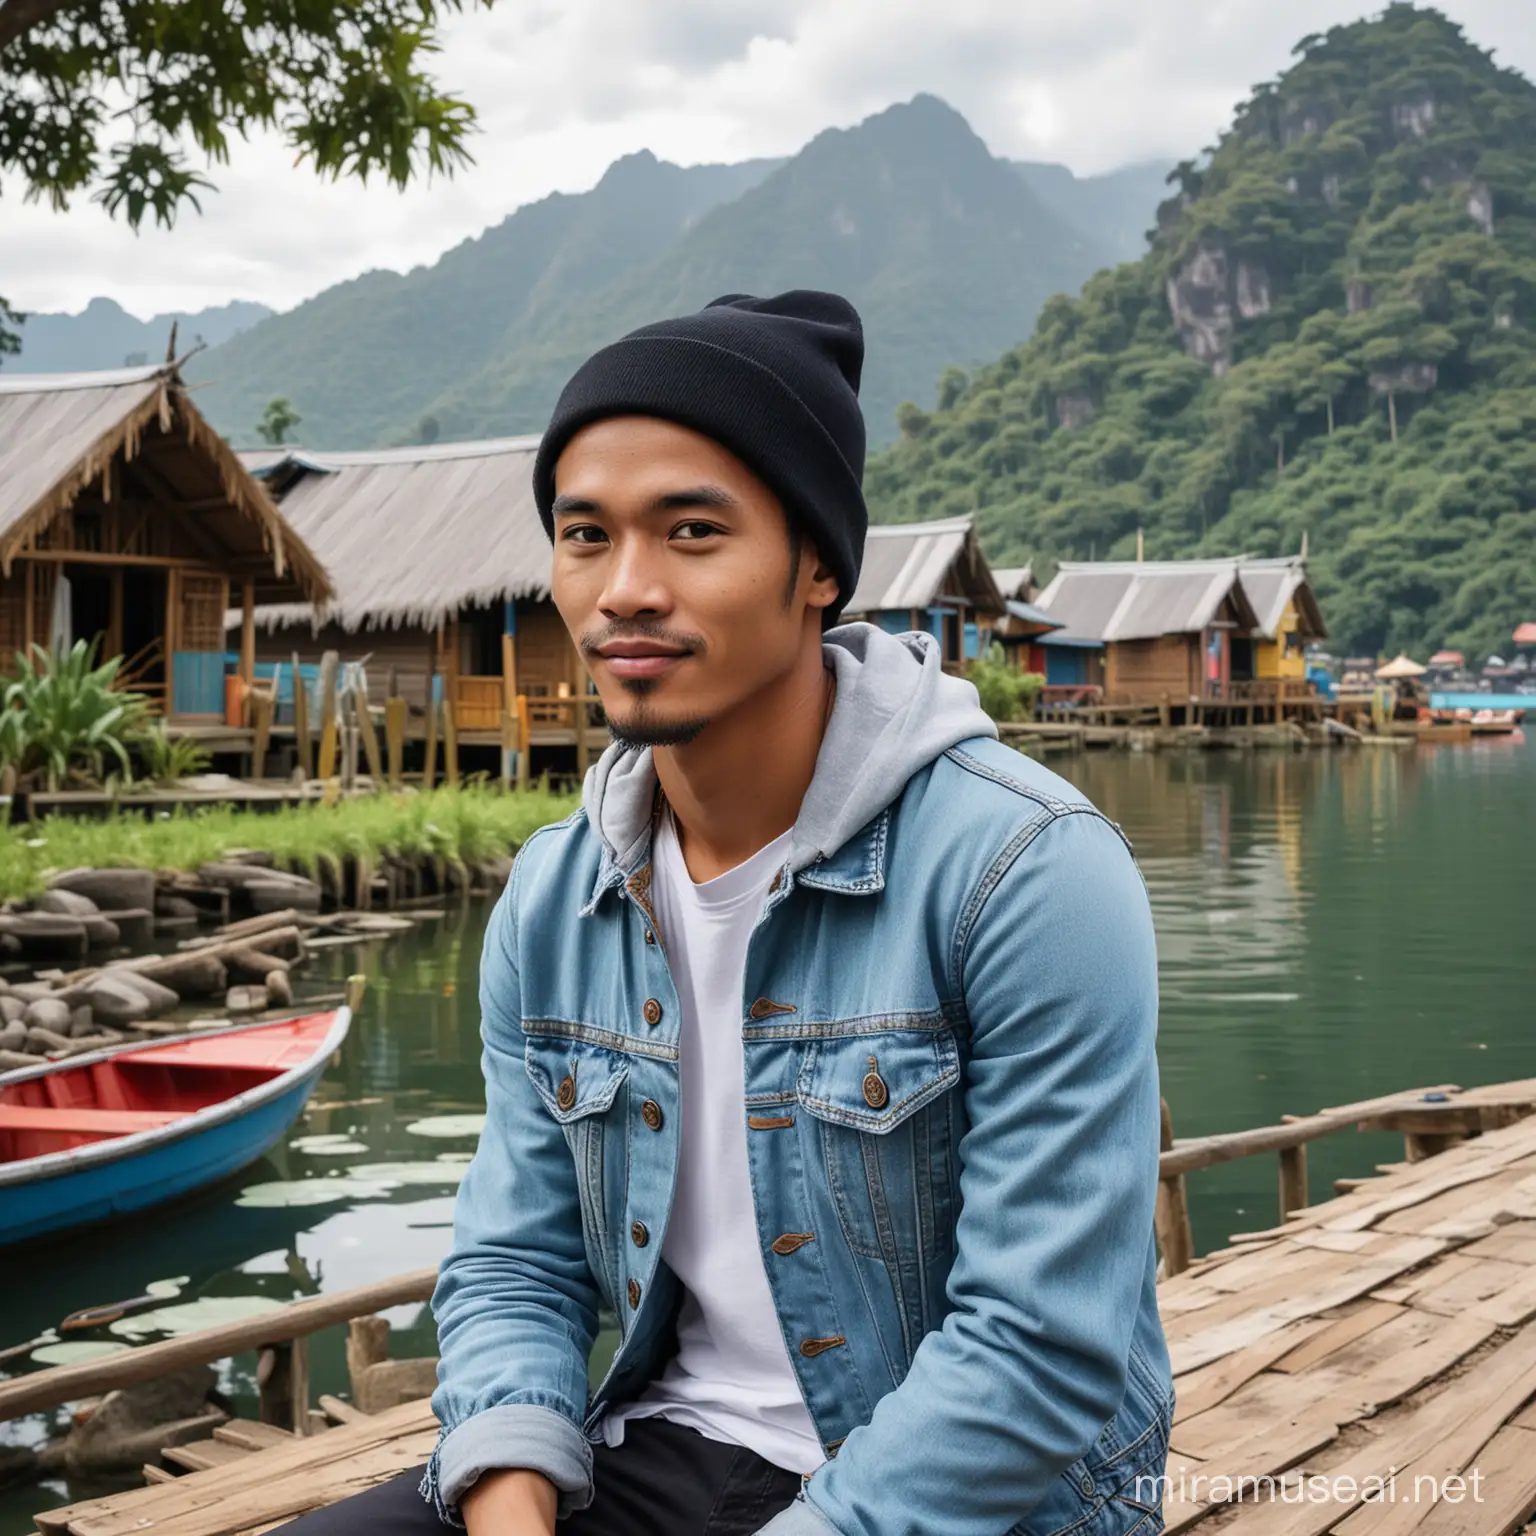 Stylish Indonesian Man Relaxing by Lake with LeafRoofed Huts